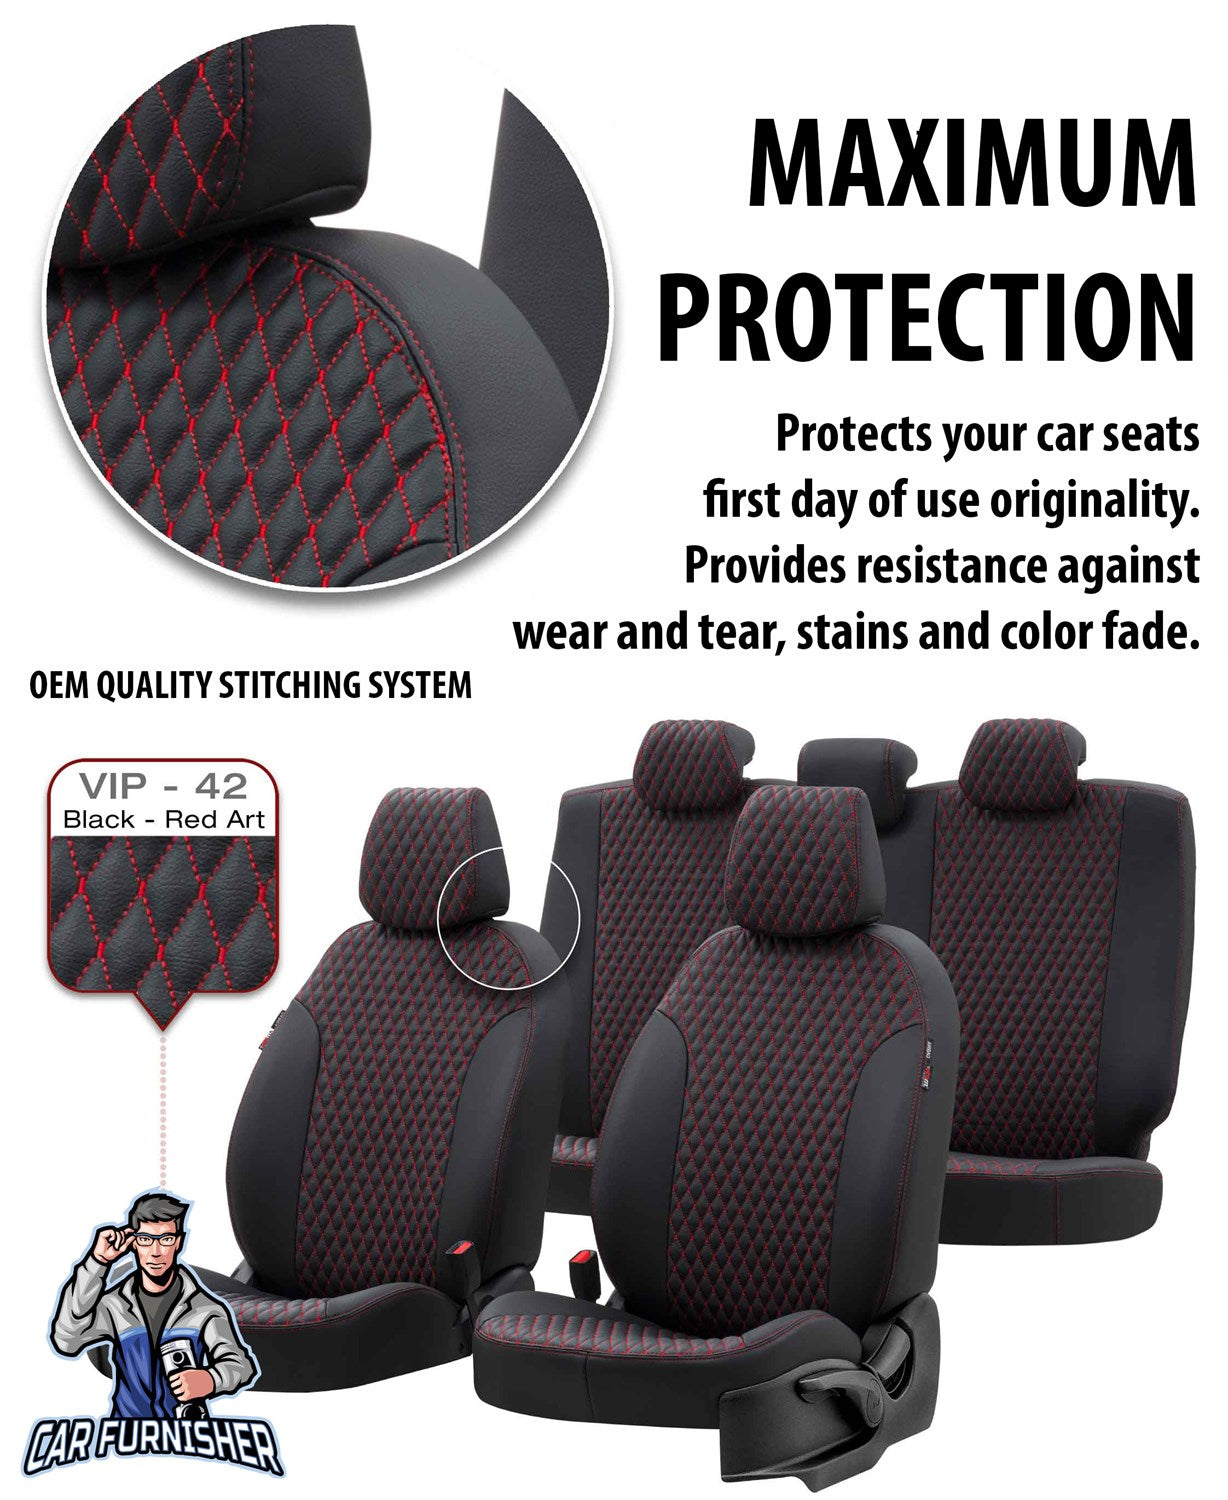 Toyota Proace City Seat Covers Amsterdam Leather Design Dark Gray Leather